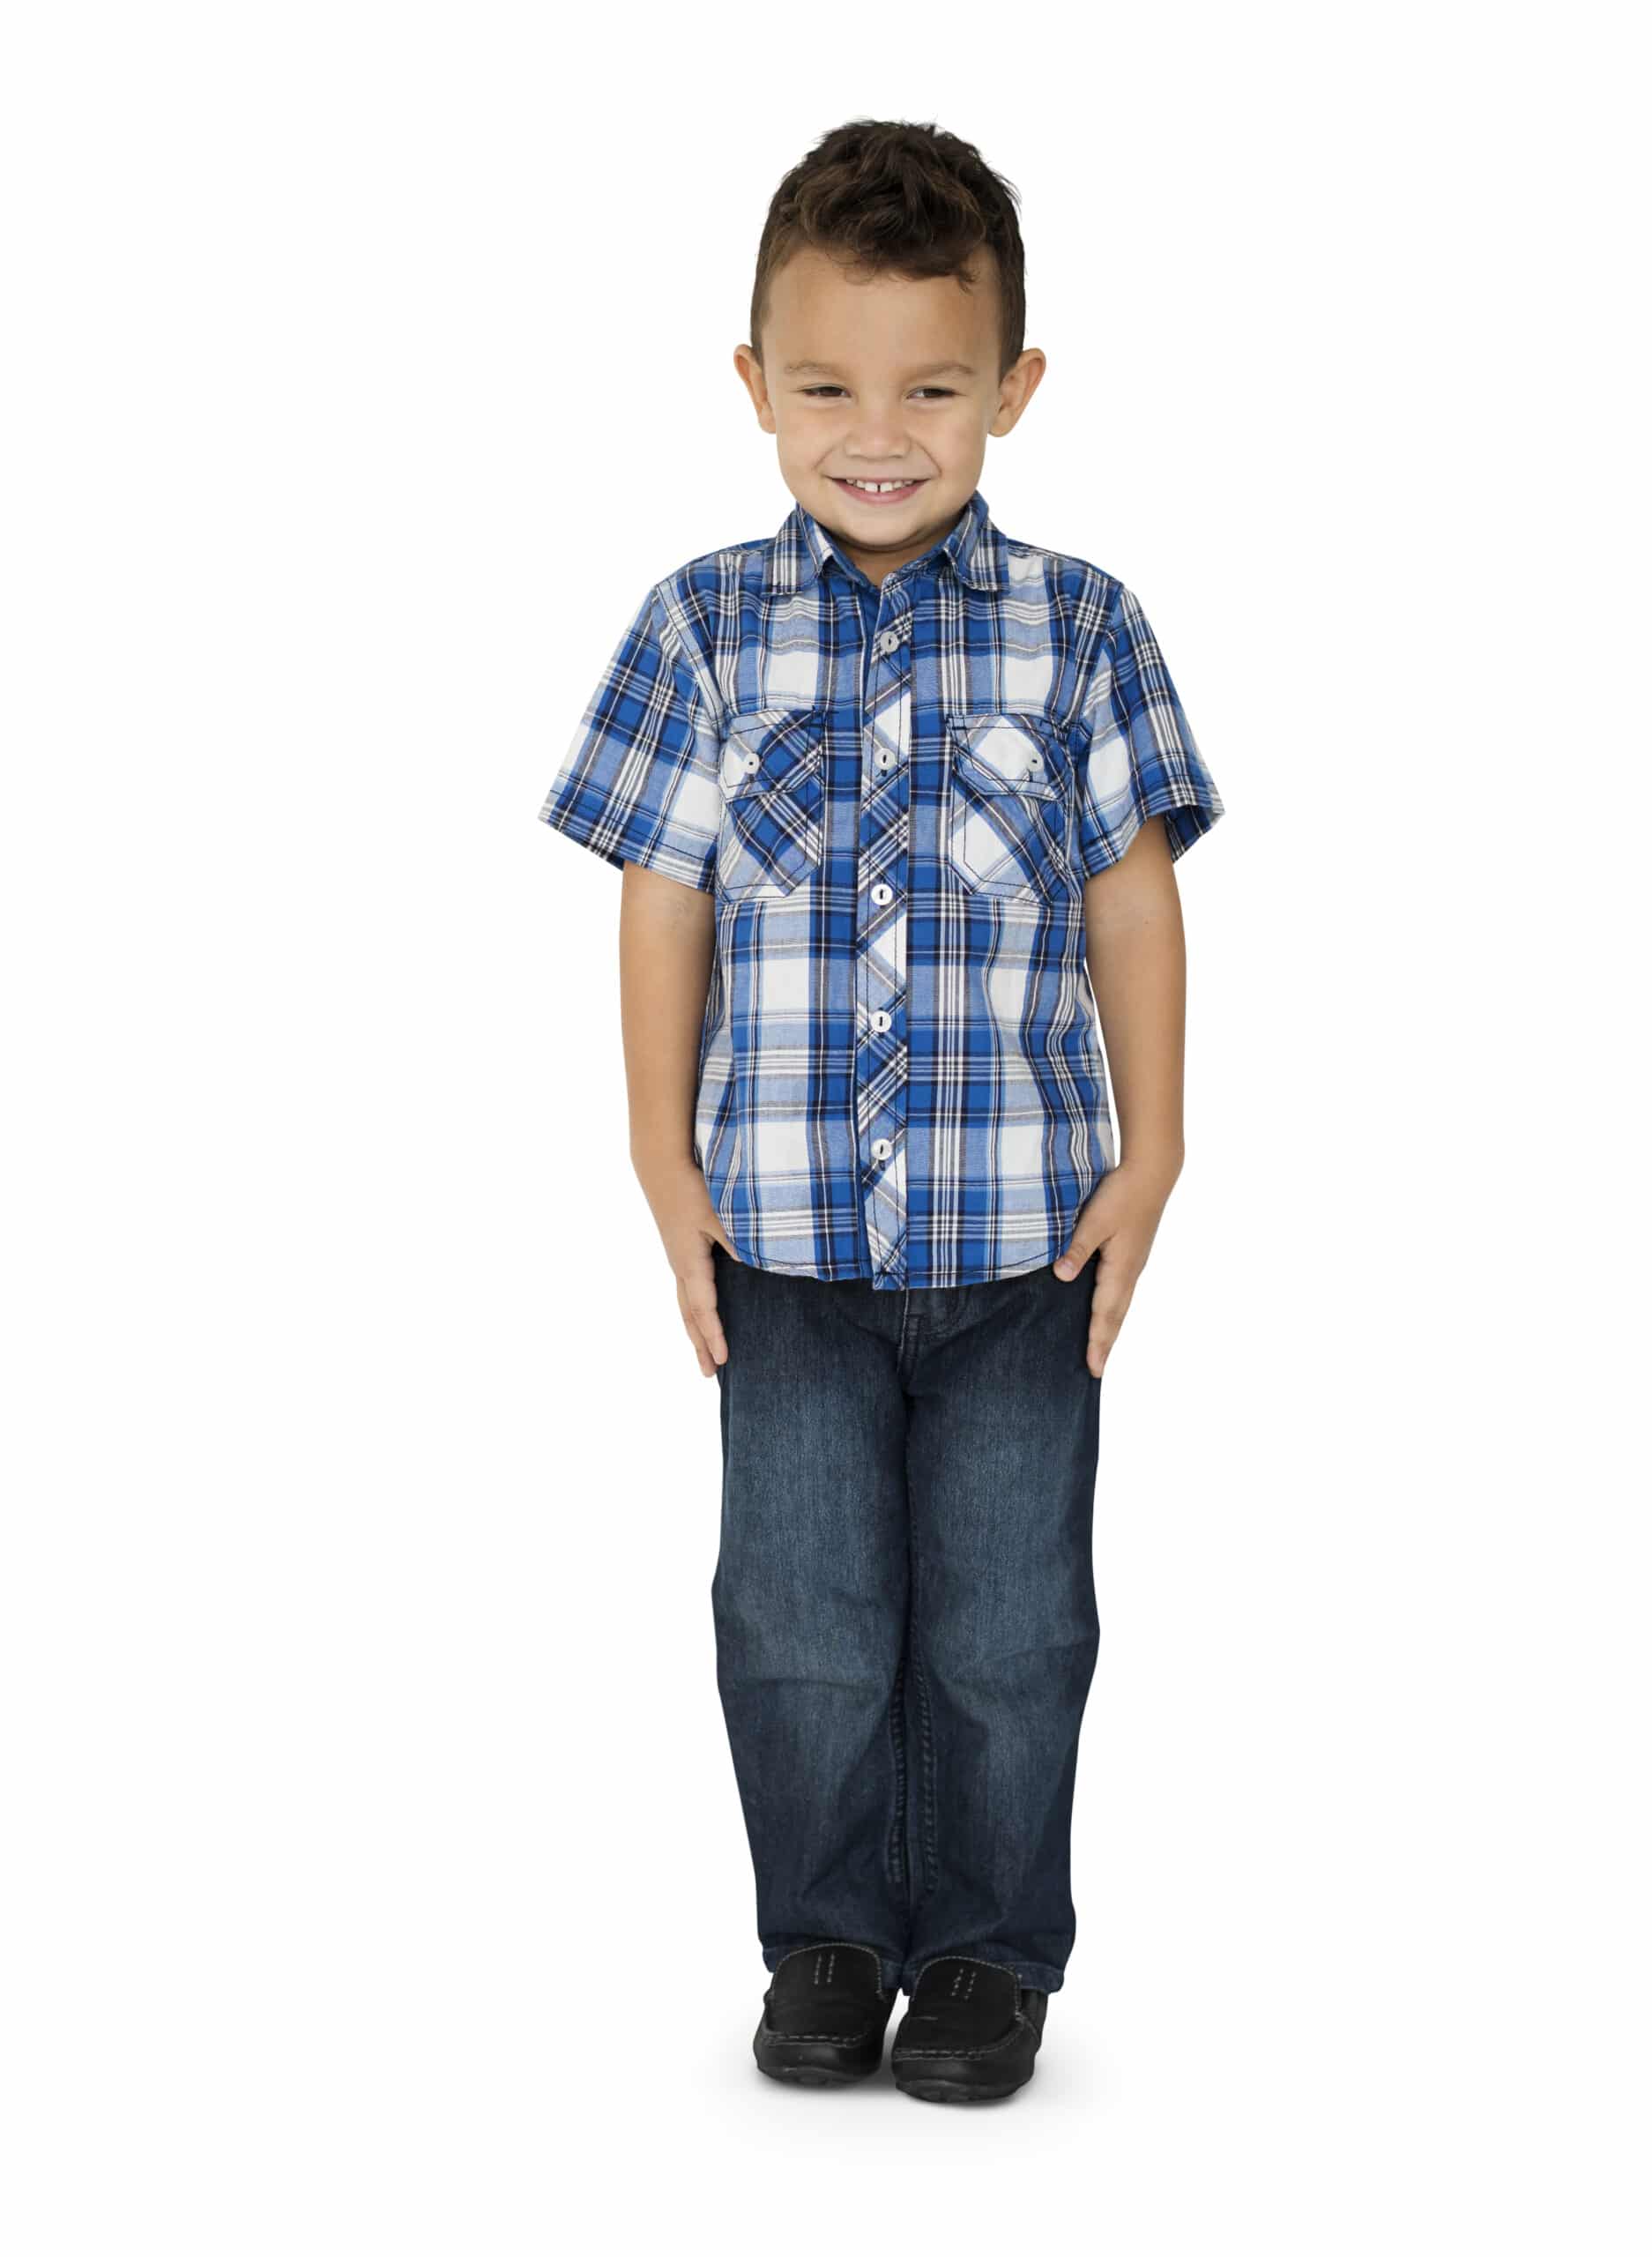 A smiling child in a plaid shirt and jeans holds their arms by their sides and stands with feet together.